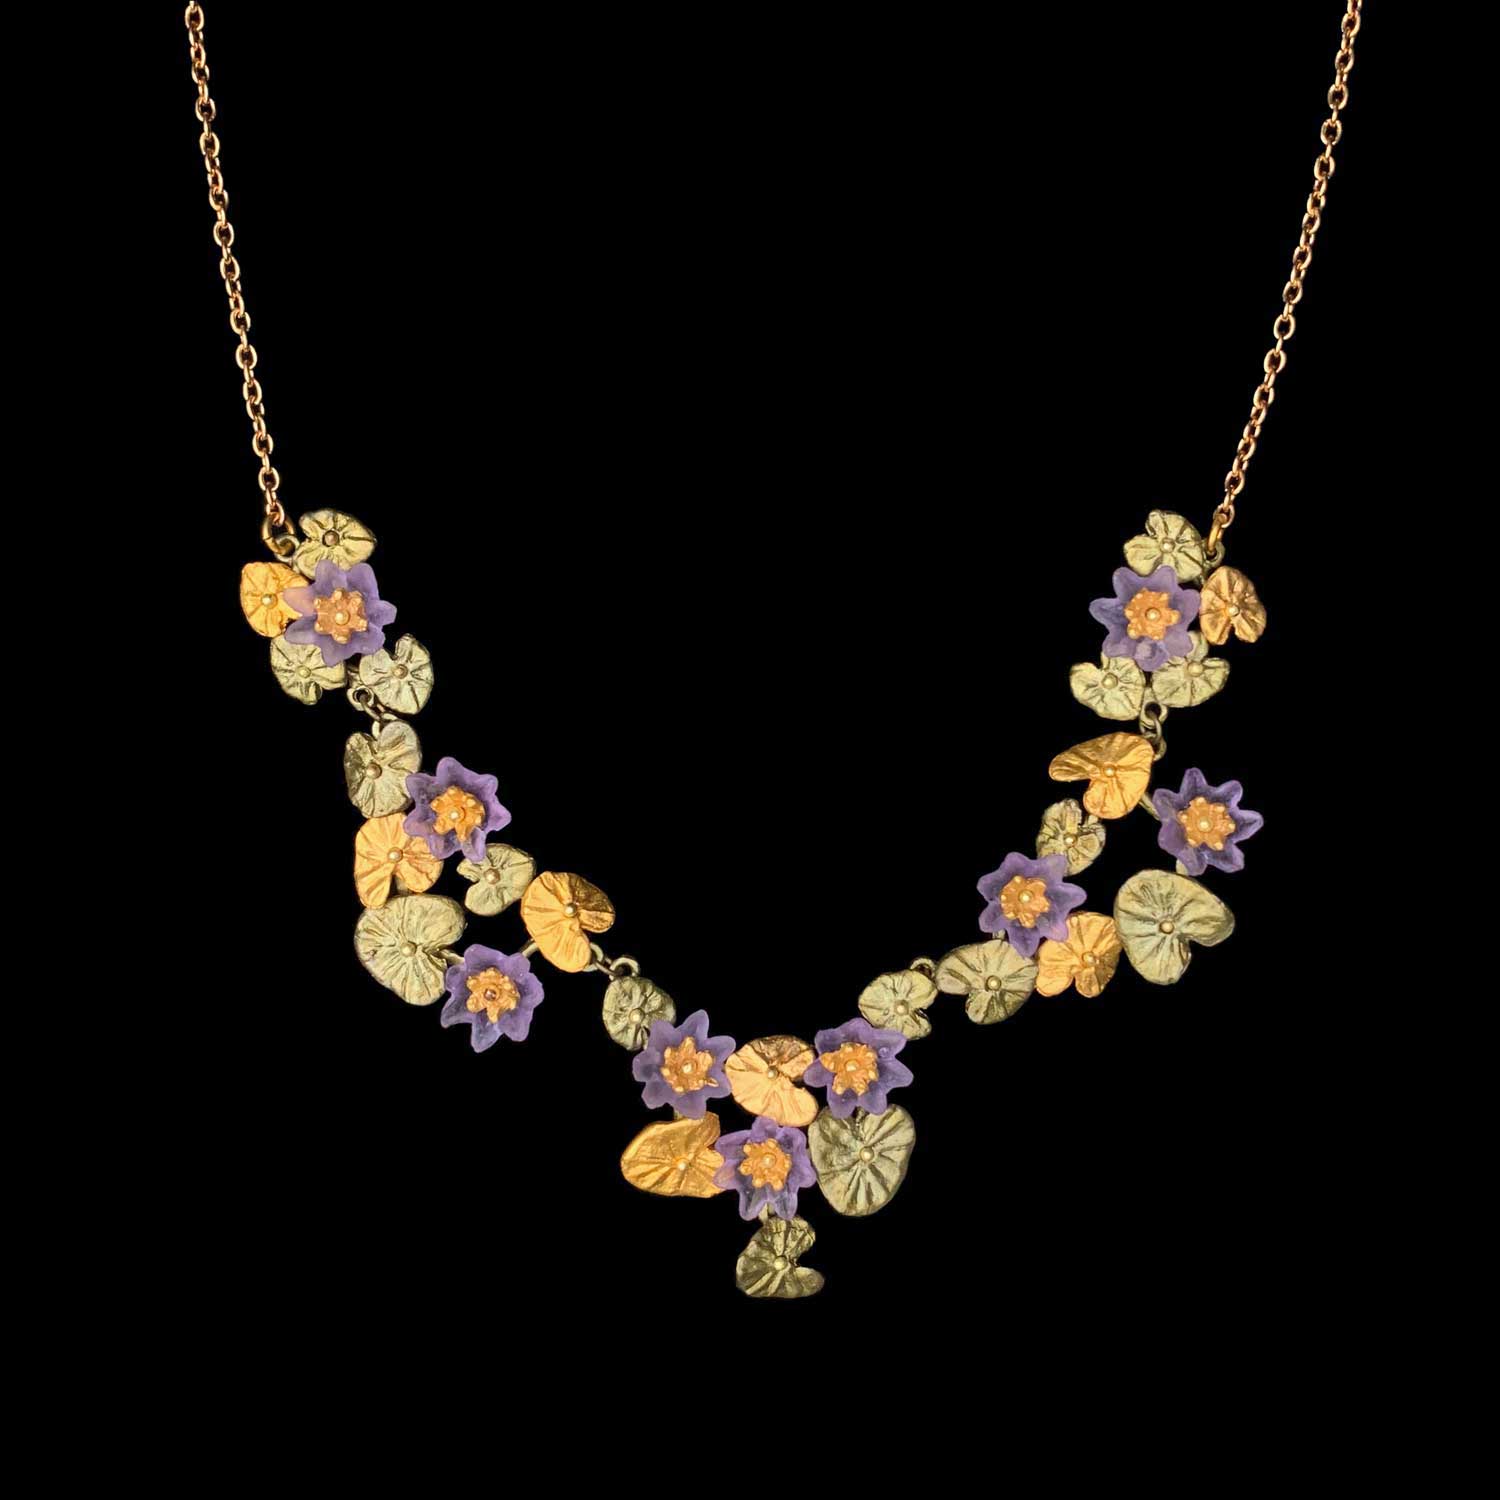 Giverny Water Lilies Necklace - Statement